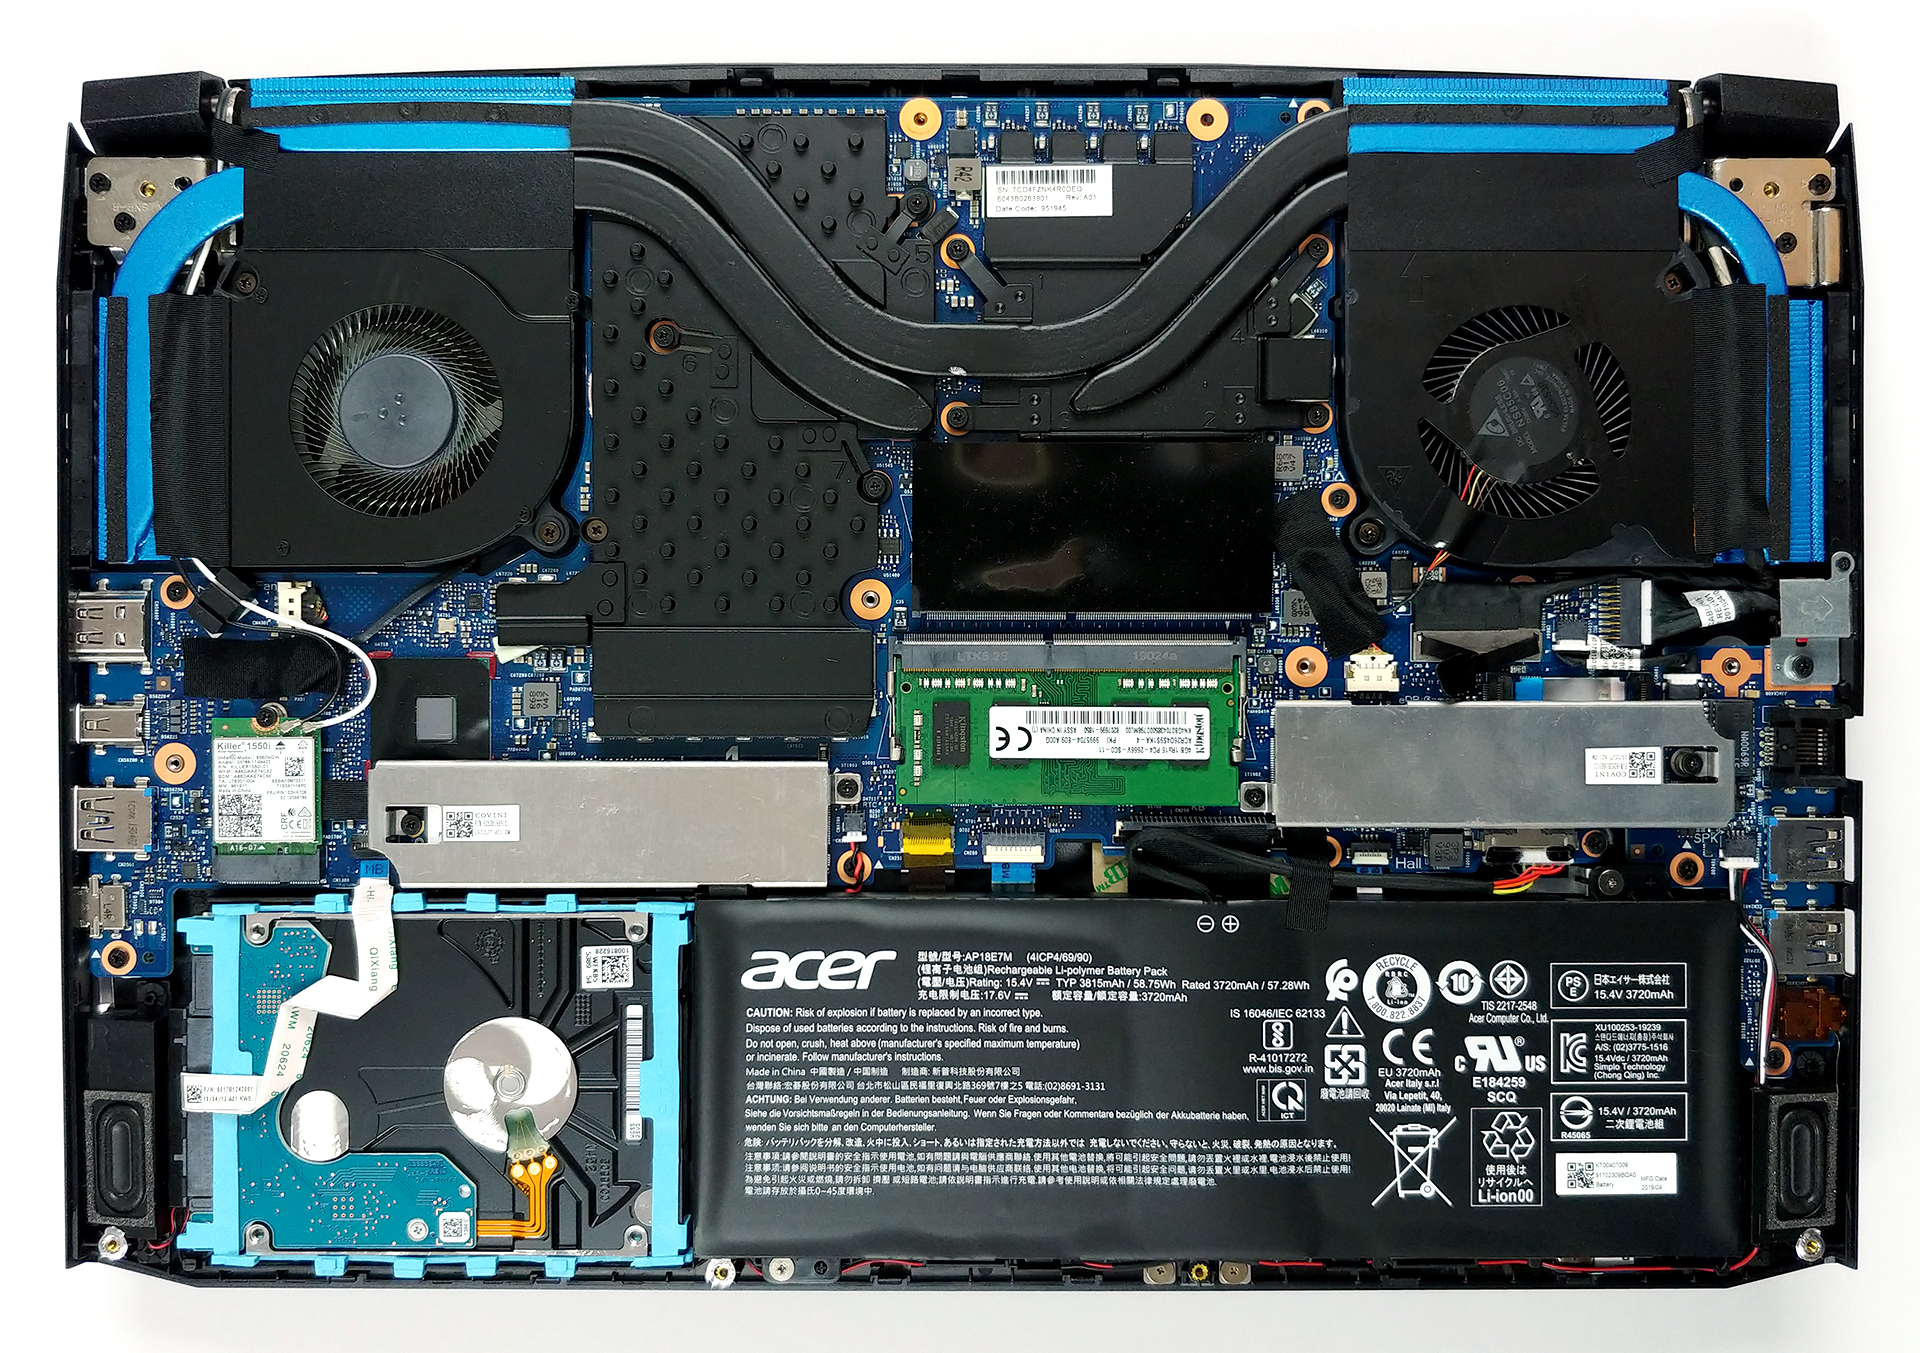 Acer Predator Helios 300 (2019) - disassembly and upgrade options |